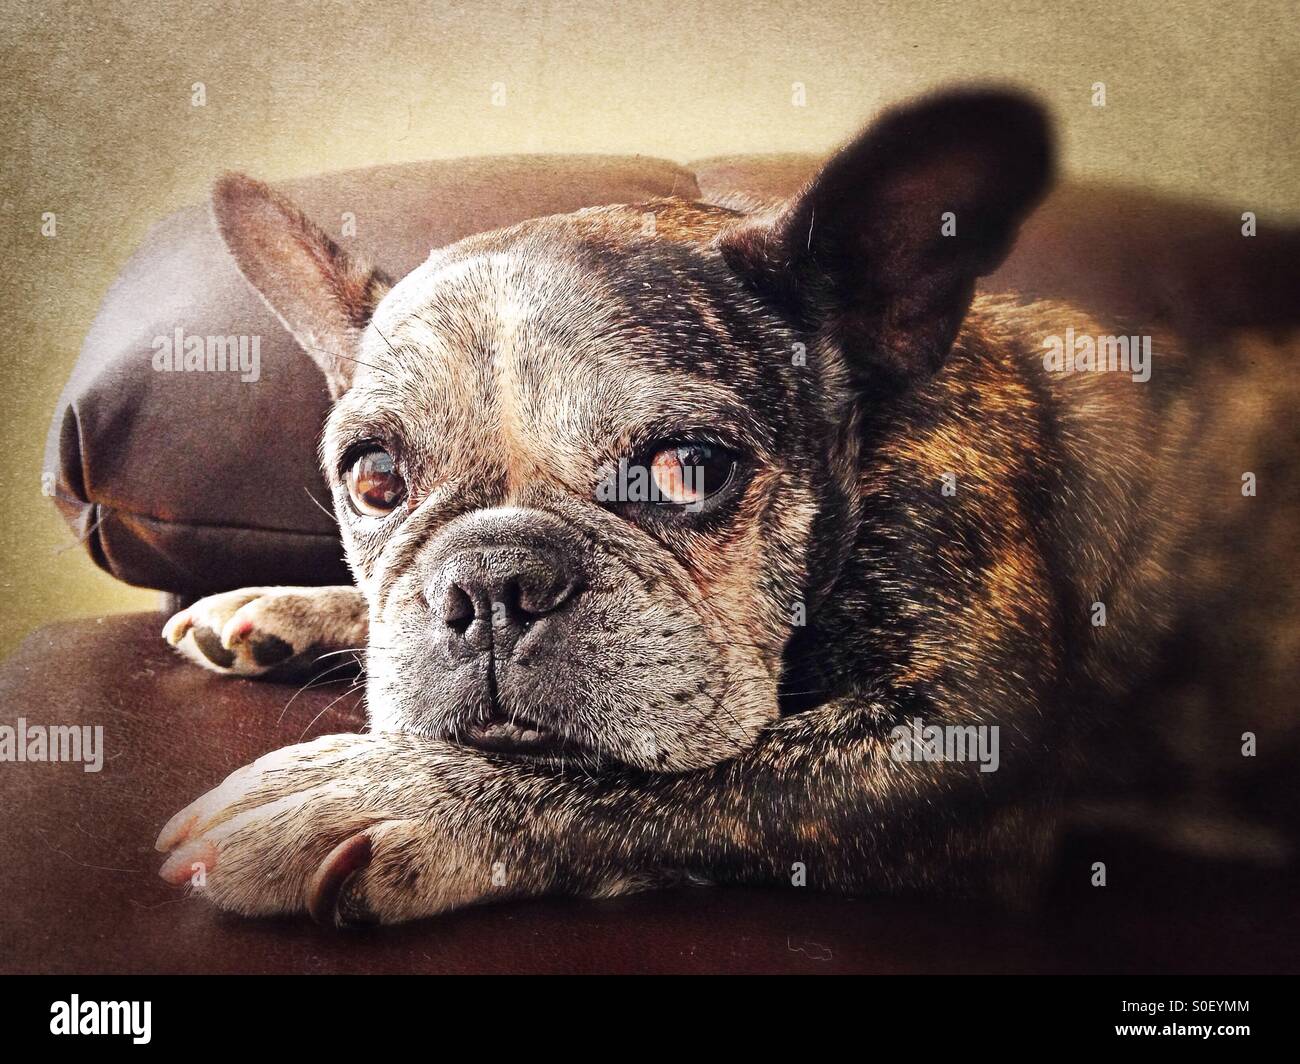 A cute, old french bulldog. Stock Photo